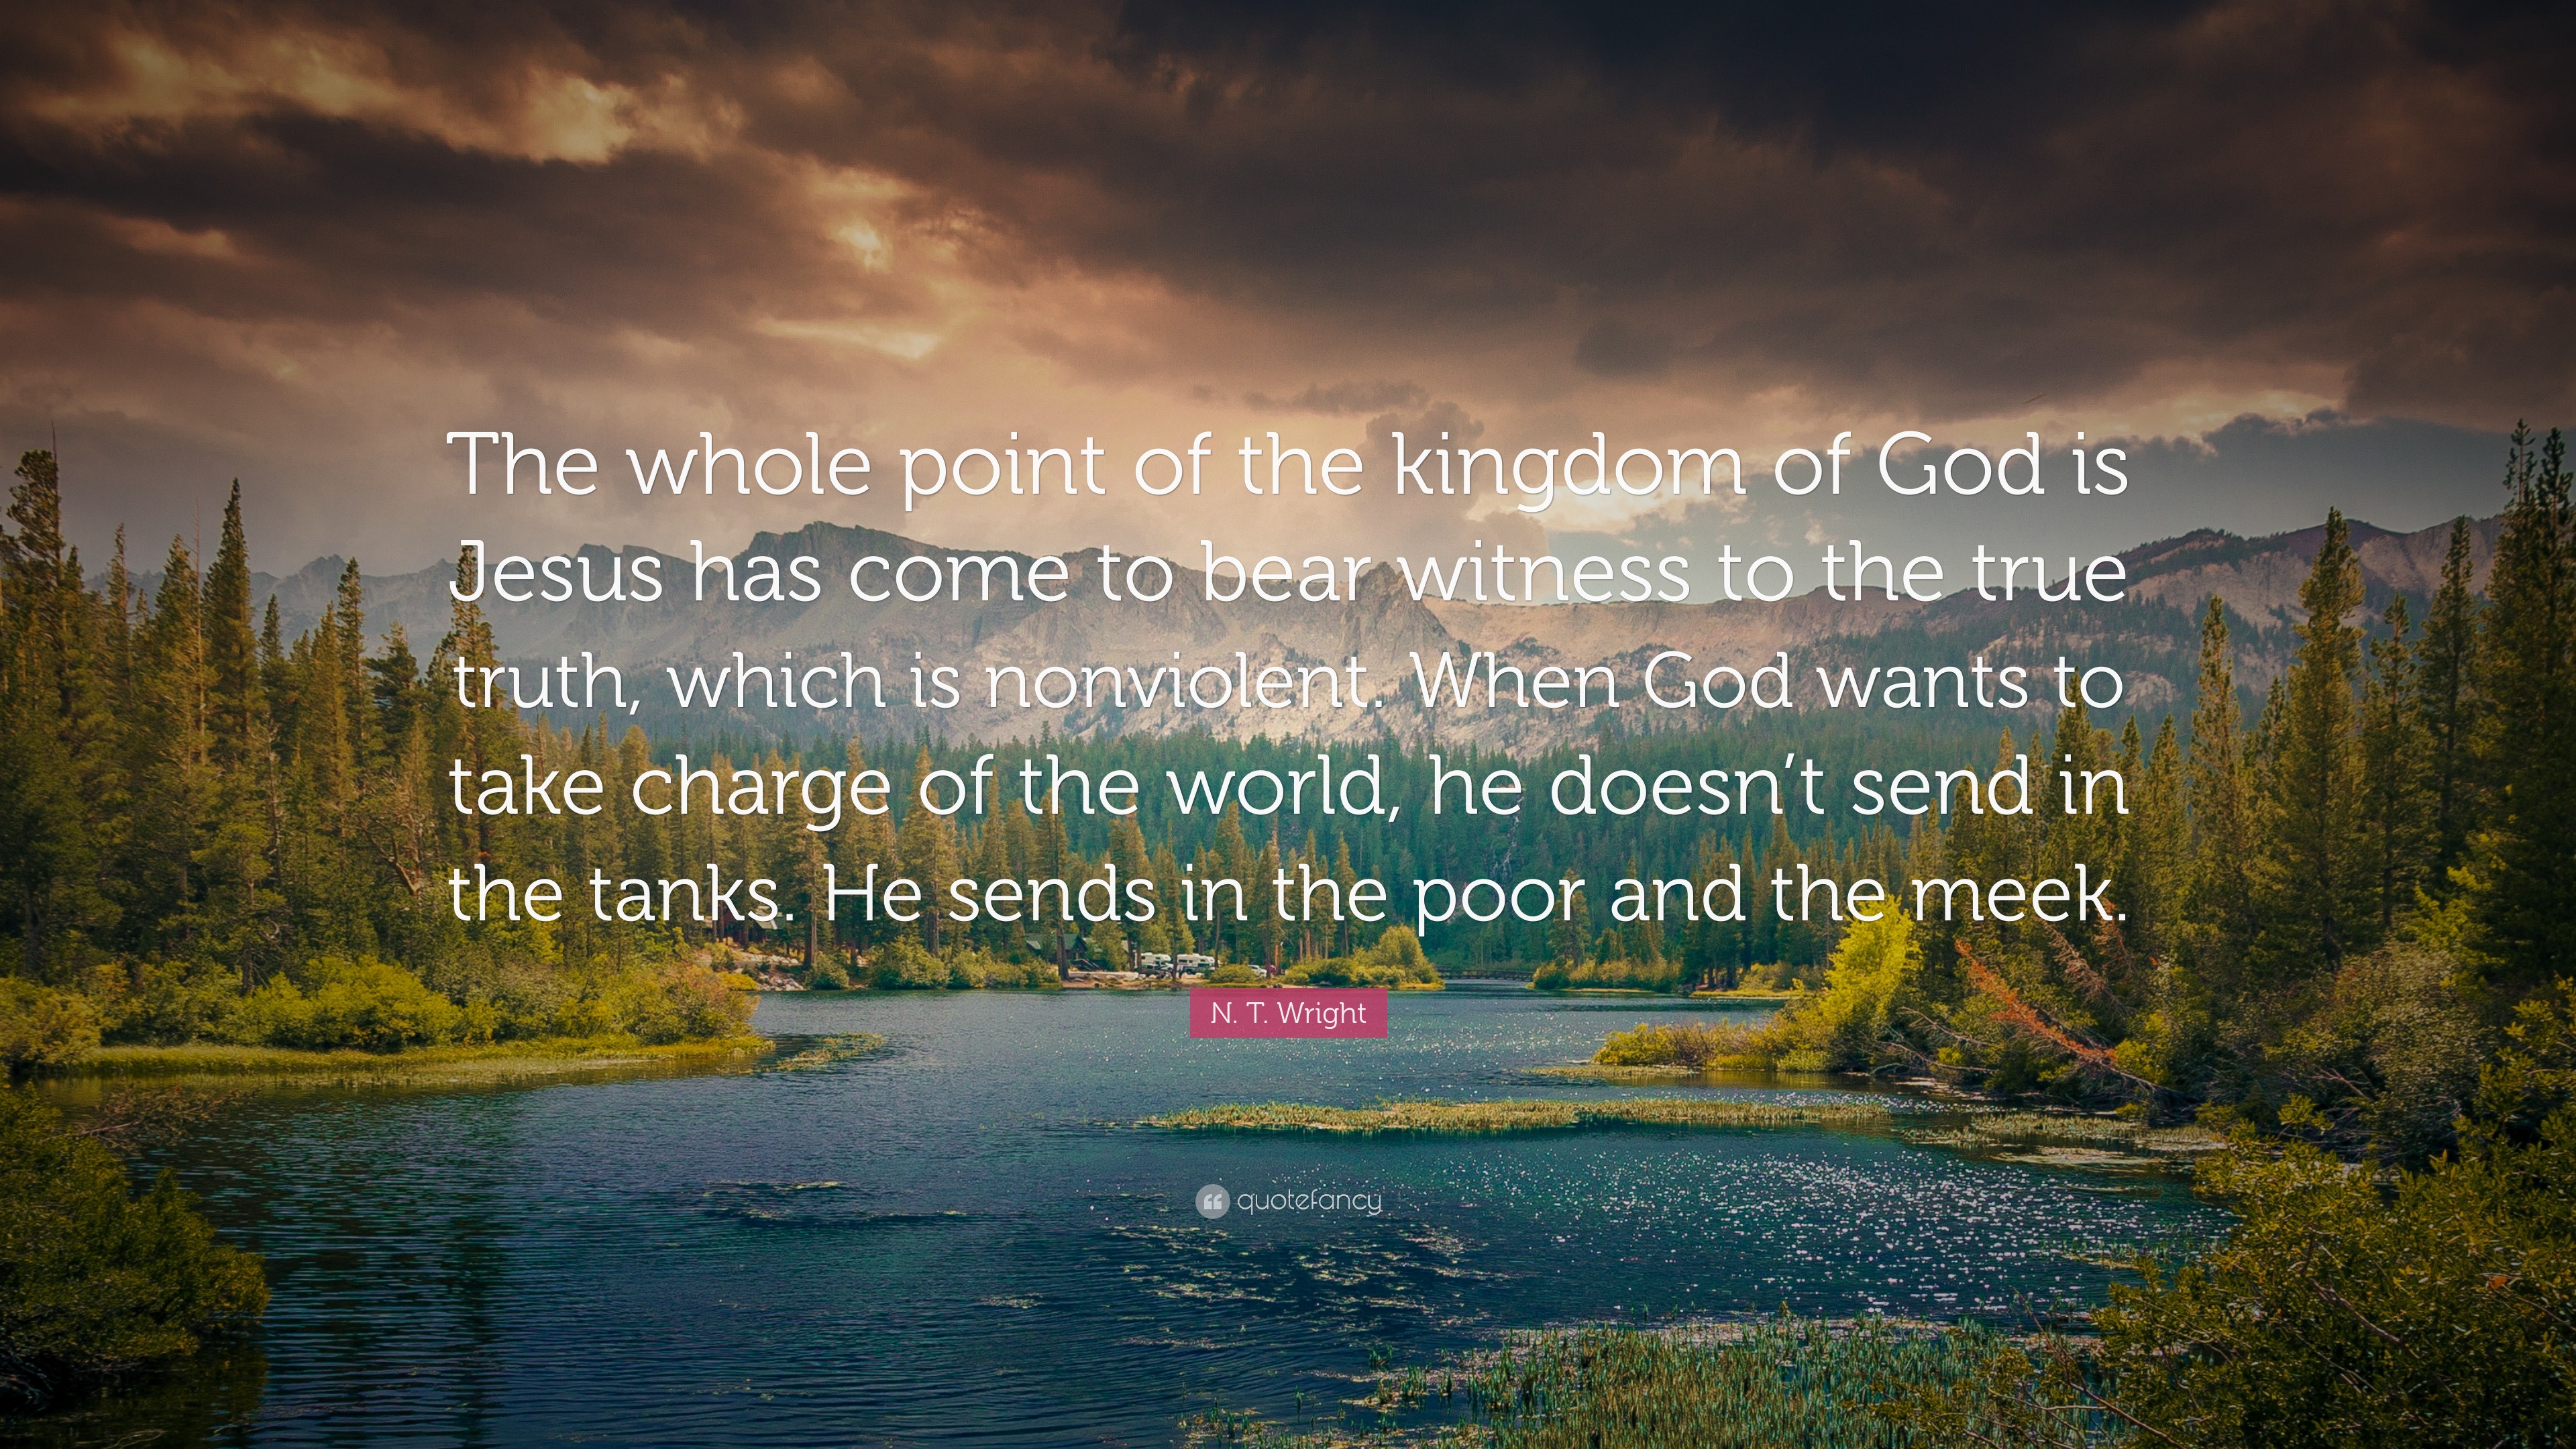 N. T. Wright Quote: “The whole point of the kingdom of God is Jesus has